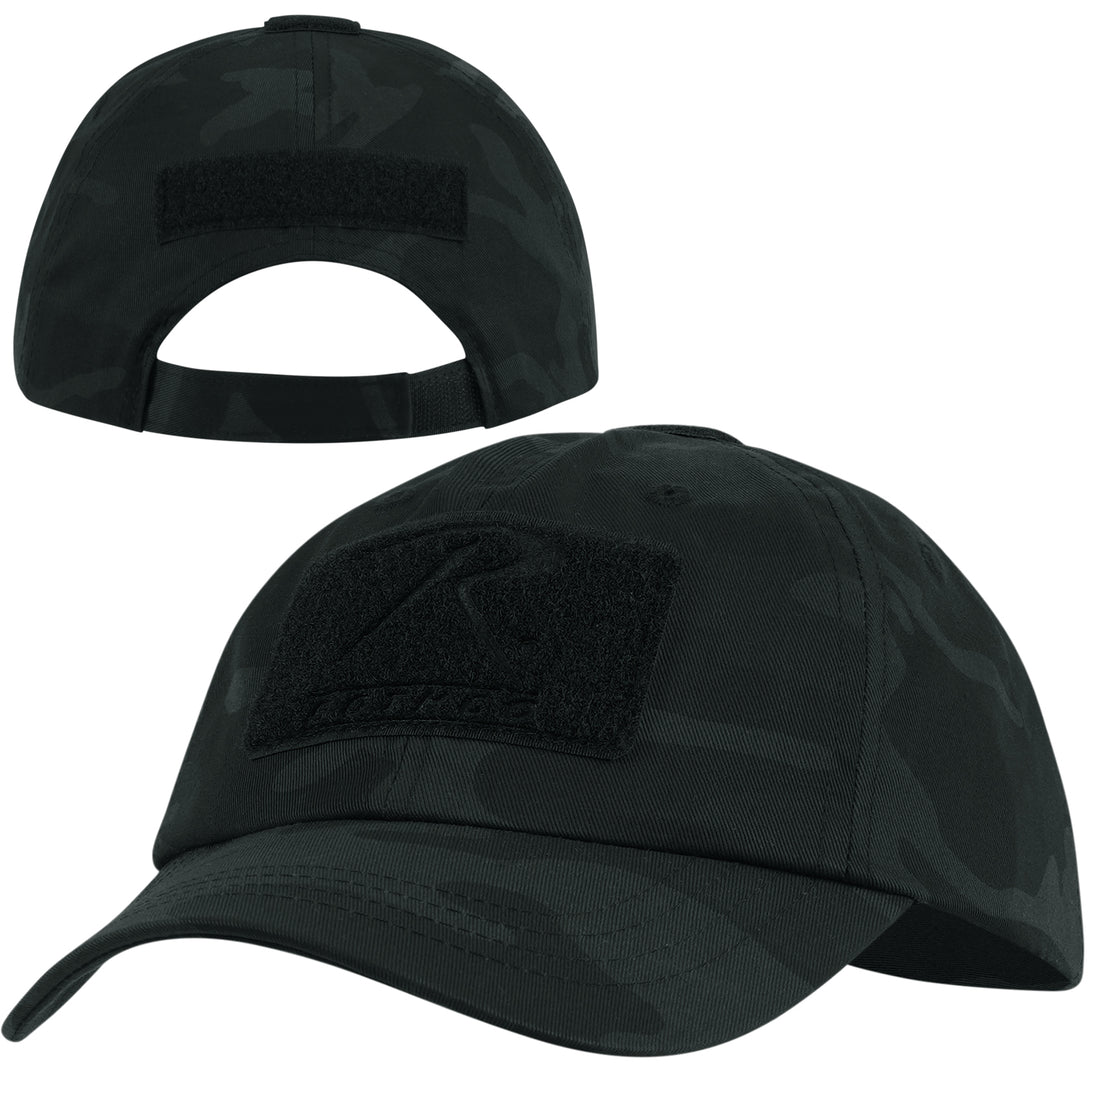 Rothco Tactical Operator Cap in Midnight Black Camo!